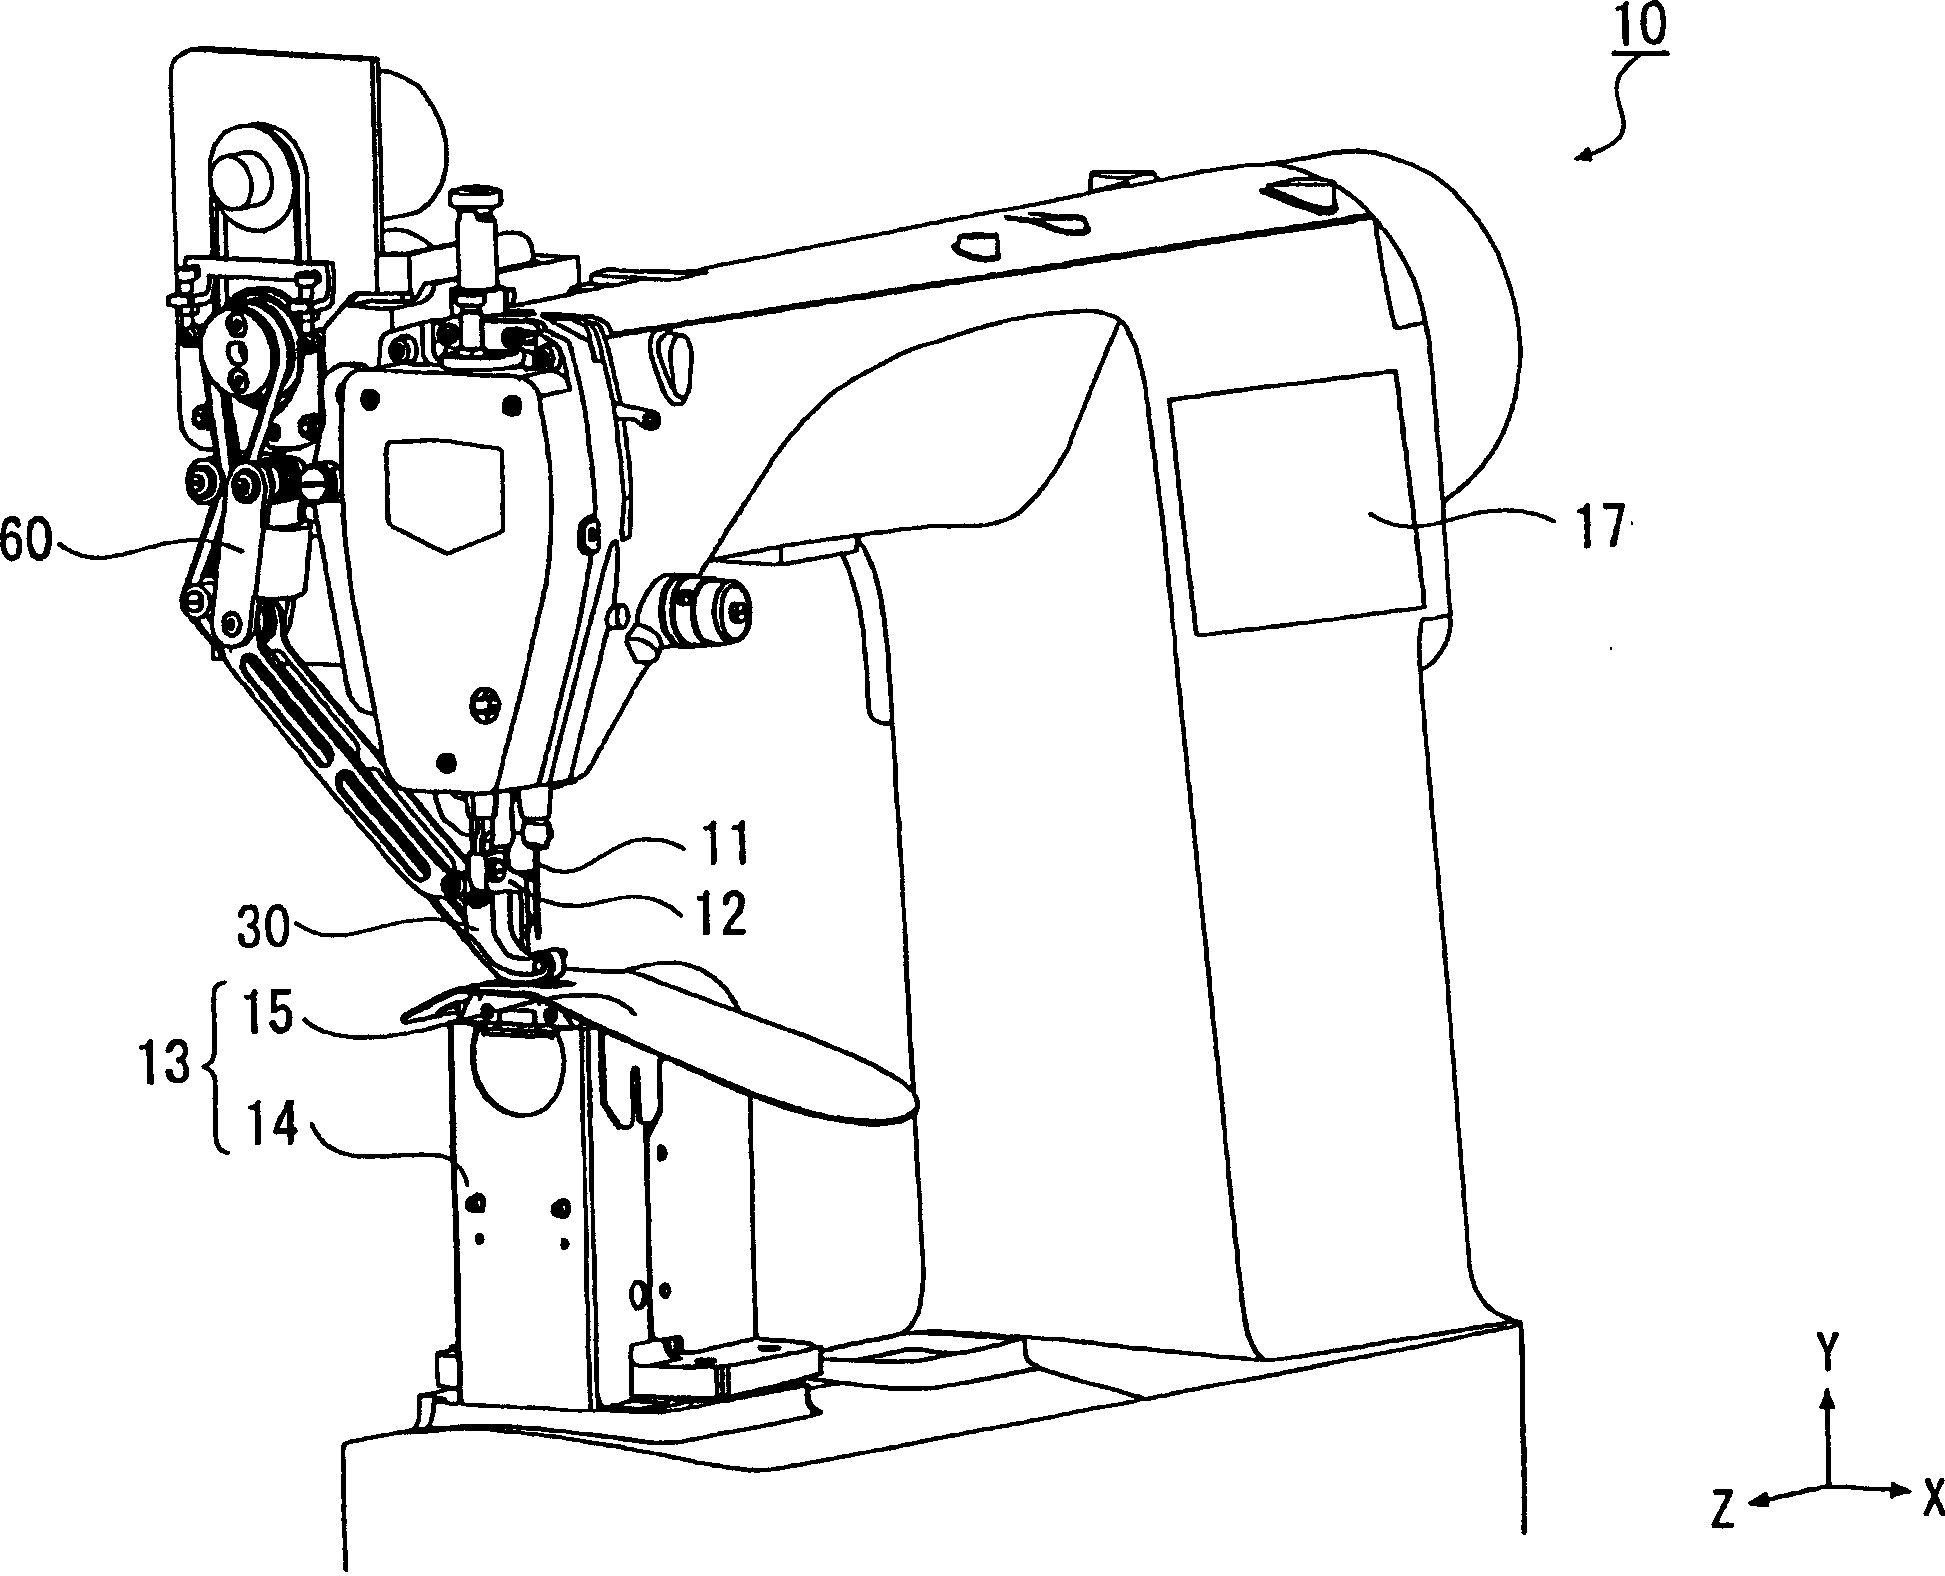 Differential cloth-feed sewing machine